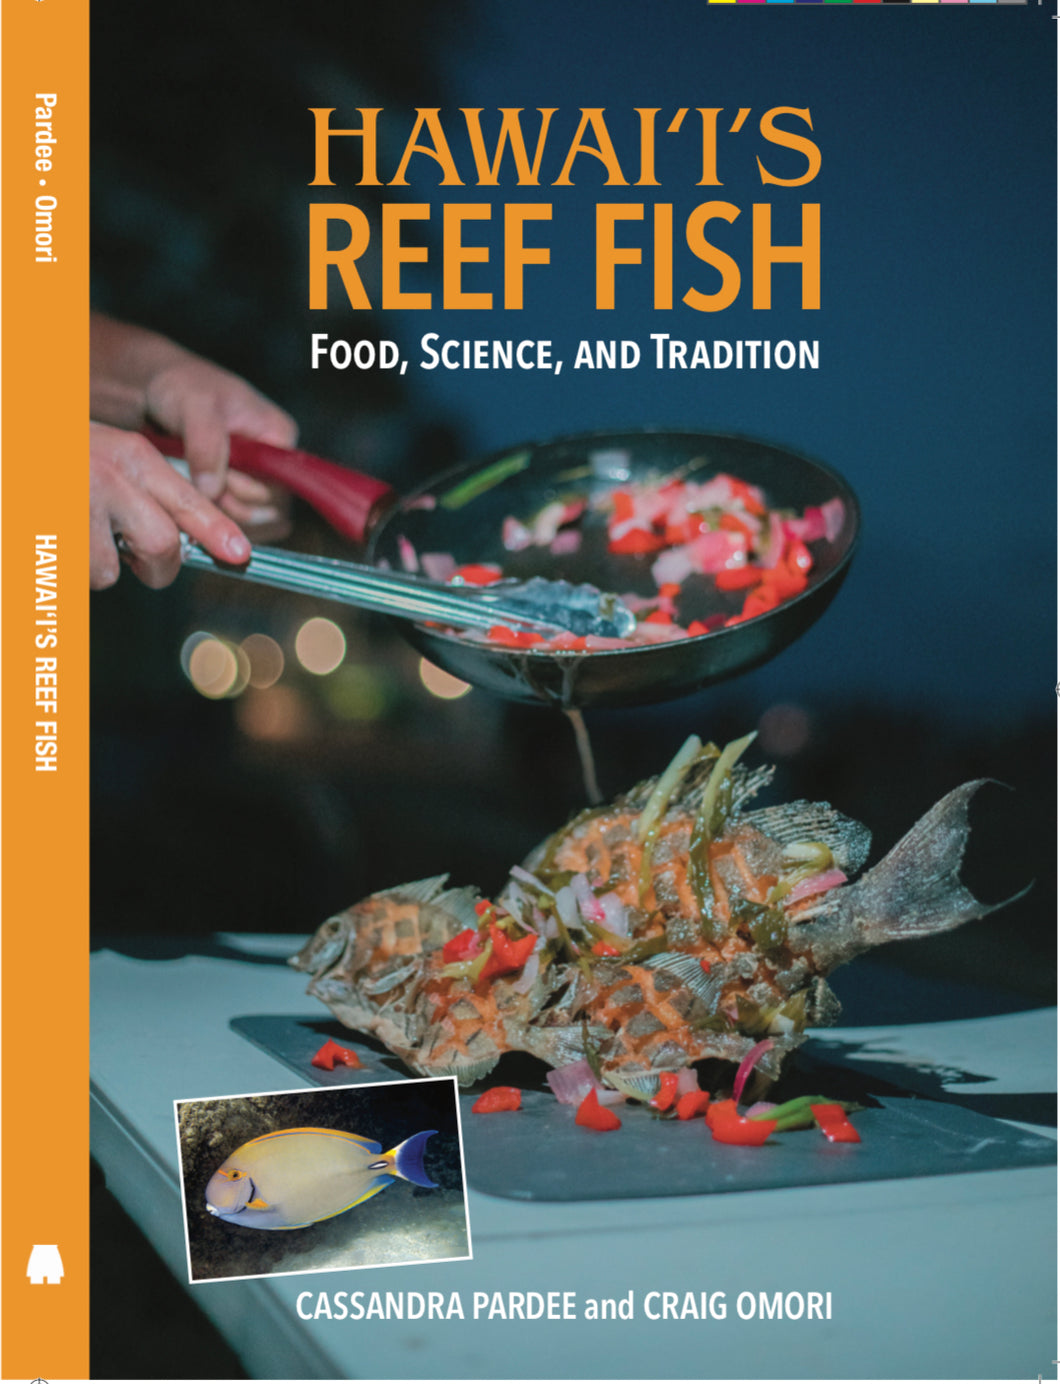 Hawaii’s Reef Fish: Food, Science and Tradition by Cassandra Pardee and Craig Omori